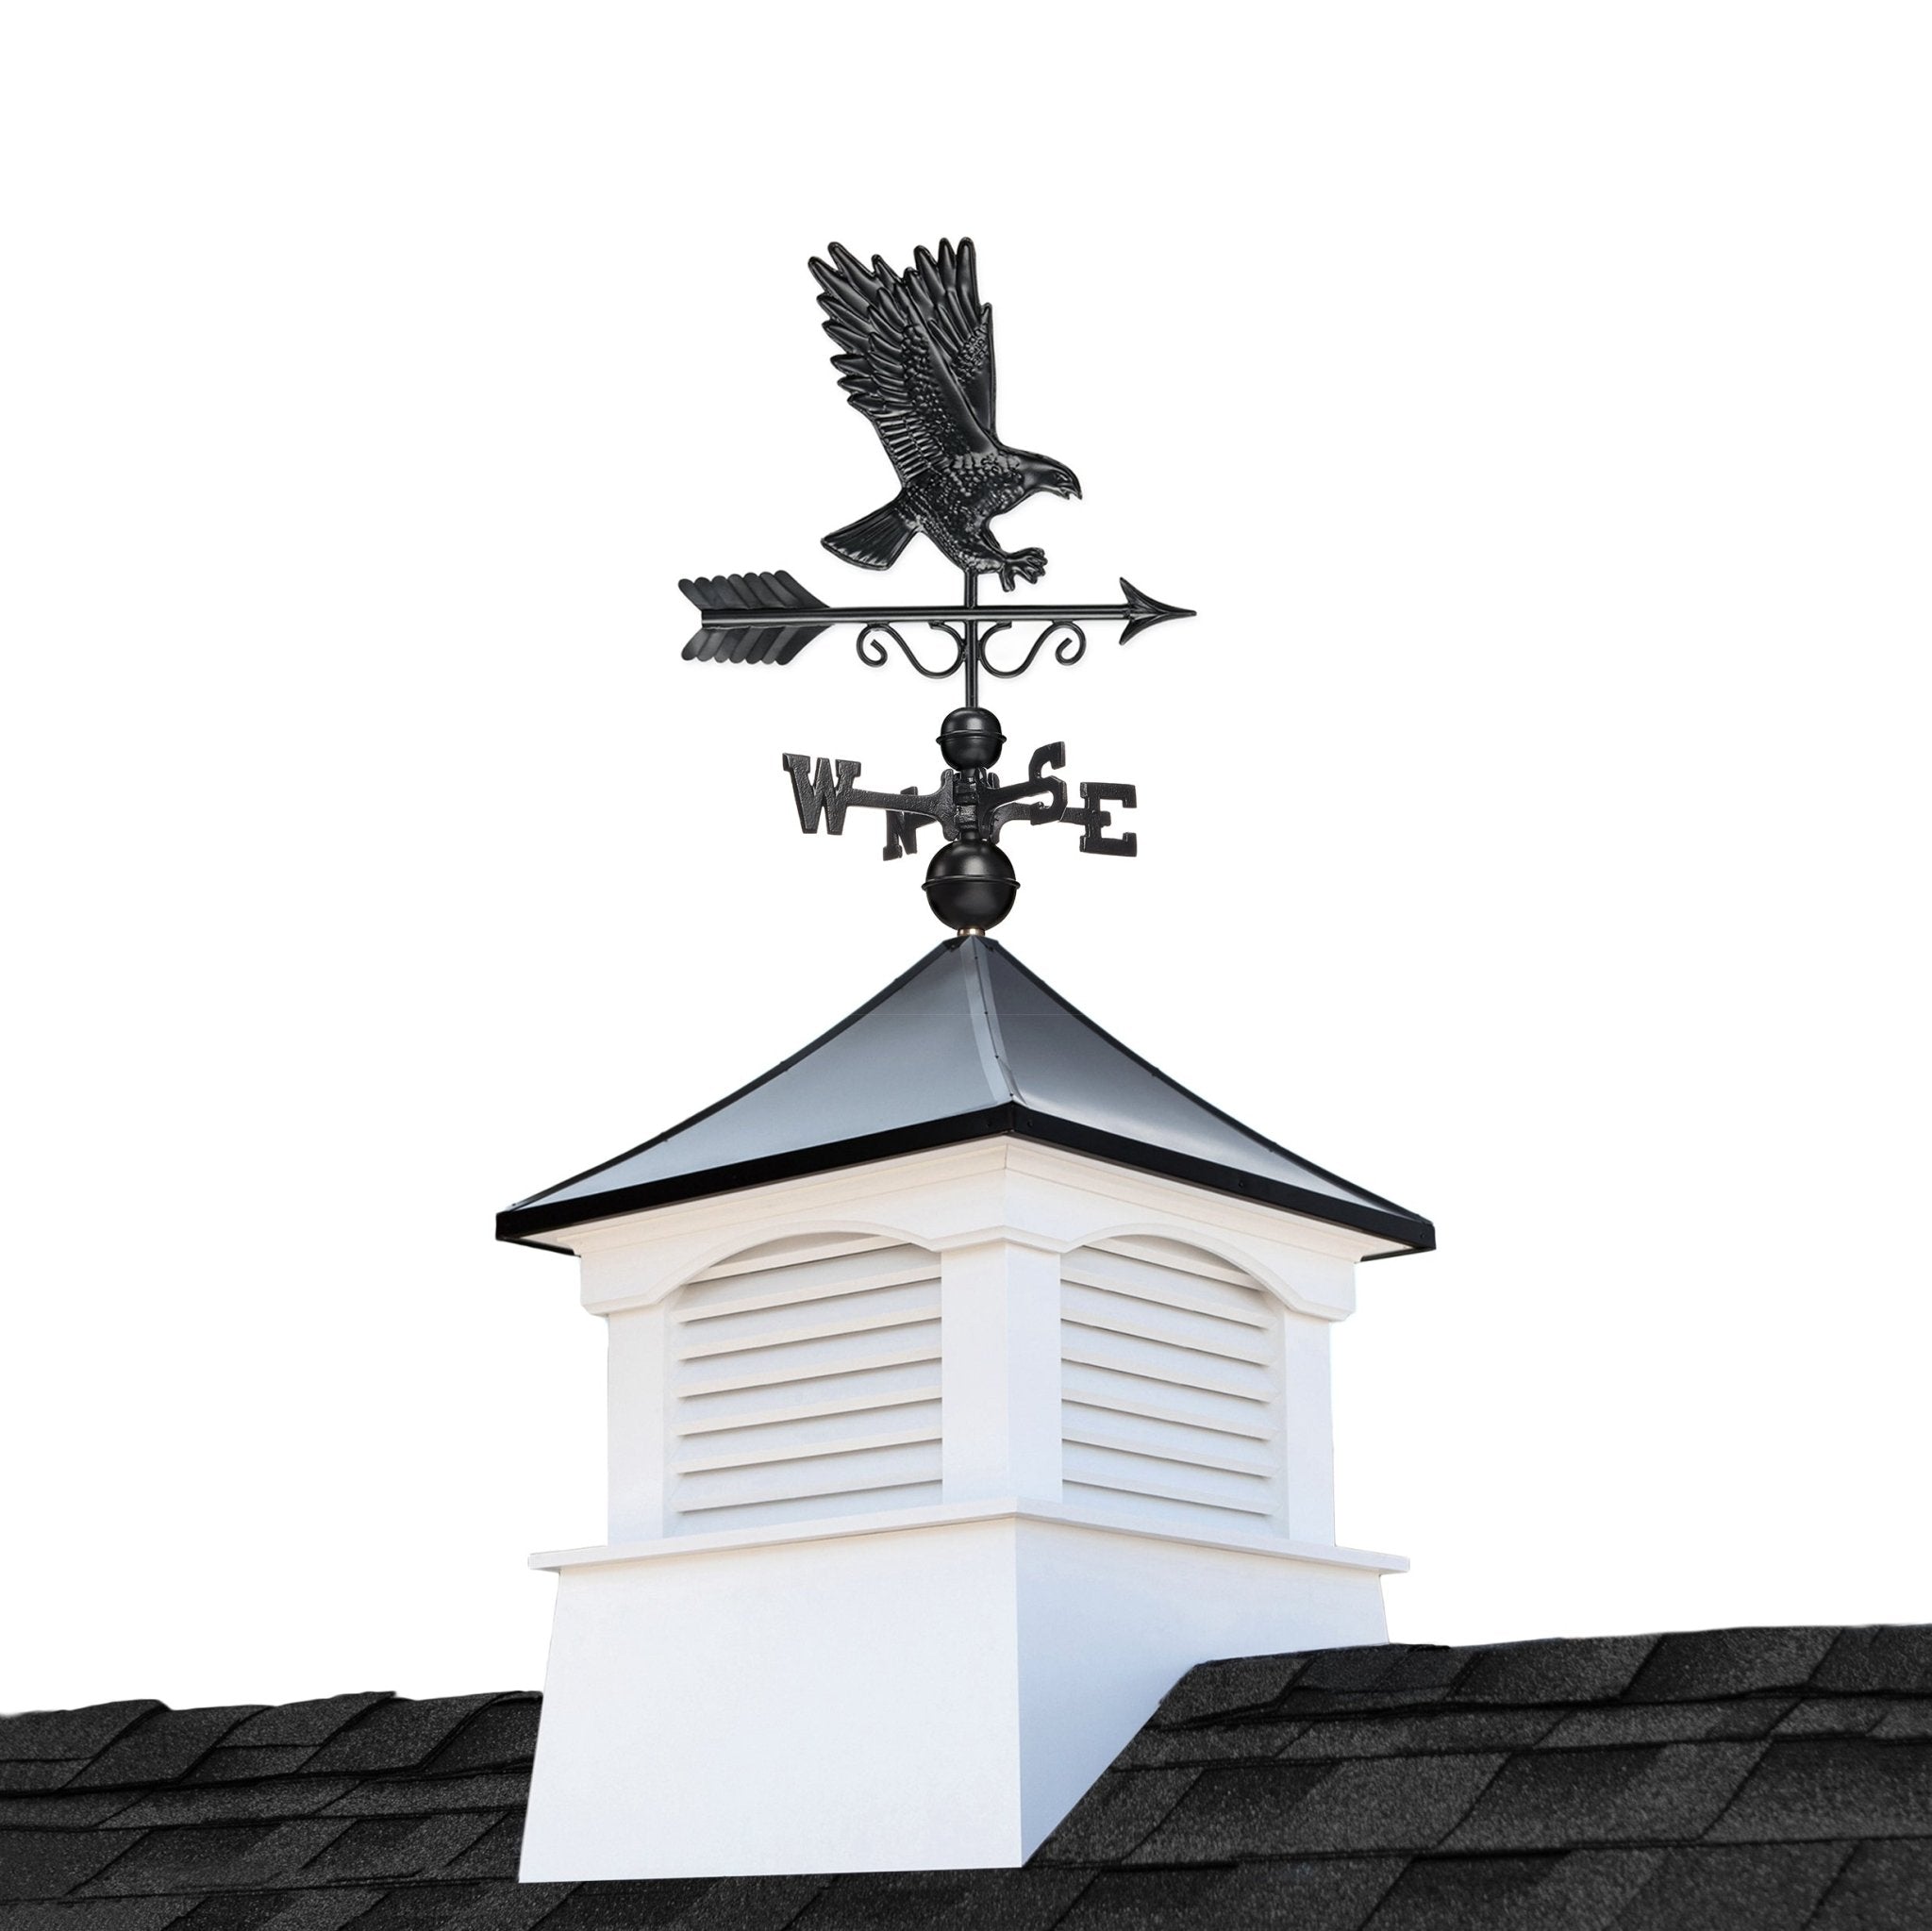 26" Square Coventry Vinyl Cupola with Black Aluminum roof and Black Aluminum Eagle Weathervane - Good Directions